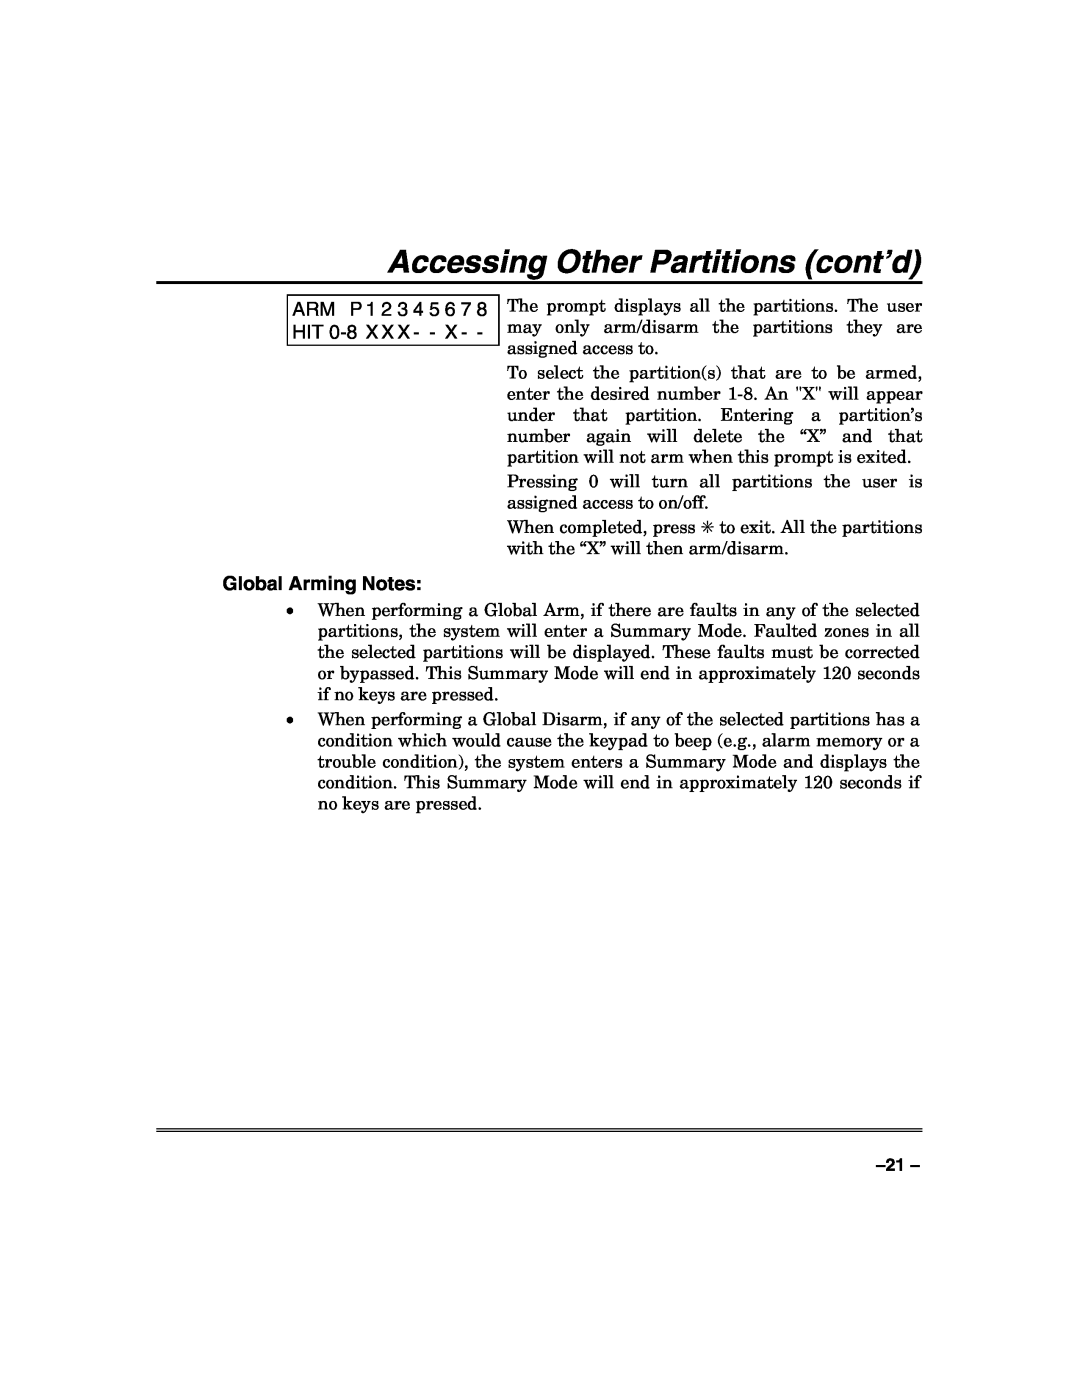 Honeywell VISTA-50PUL manual Accessing Other Partitions cont’d, Global Arming Notes 